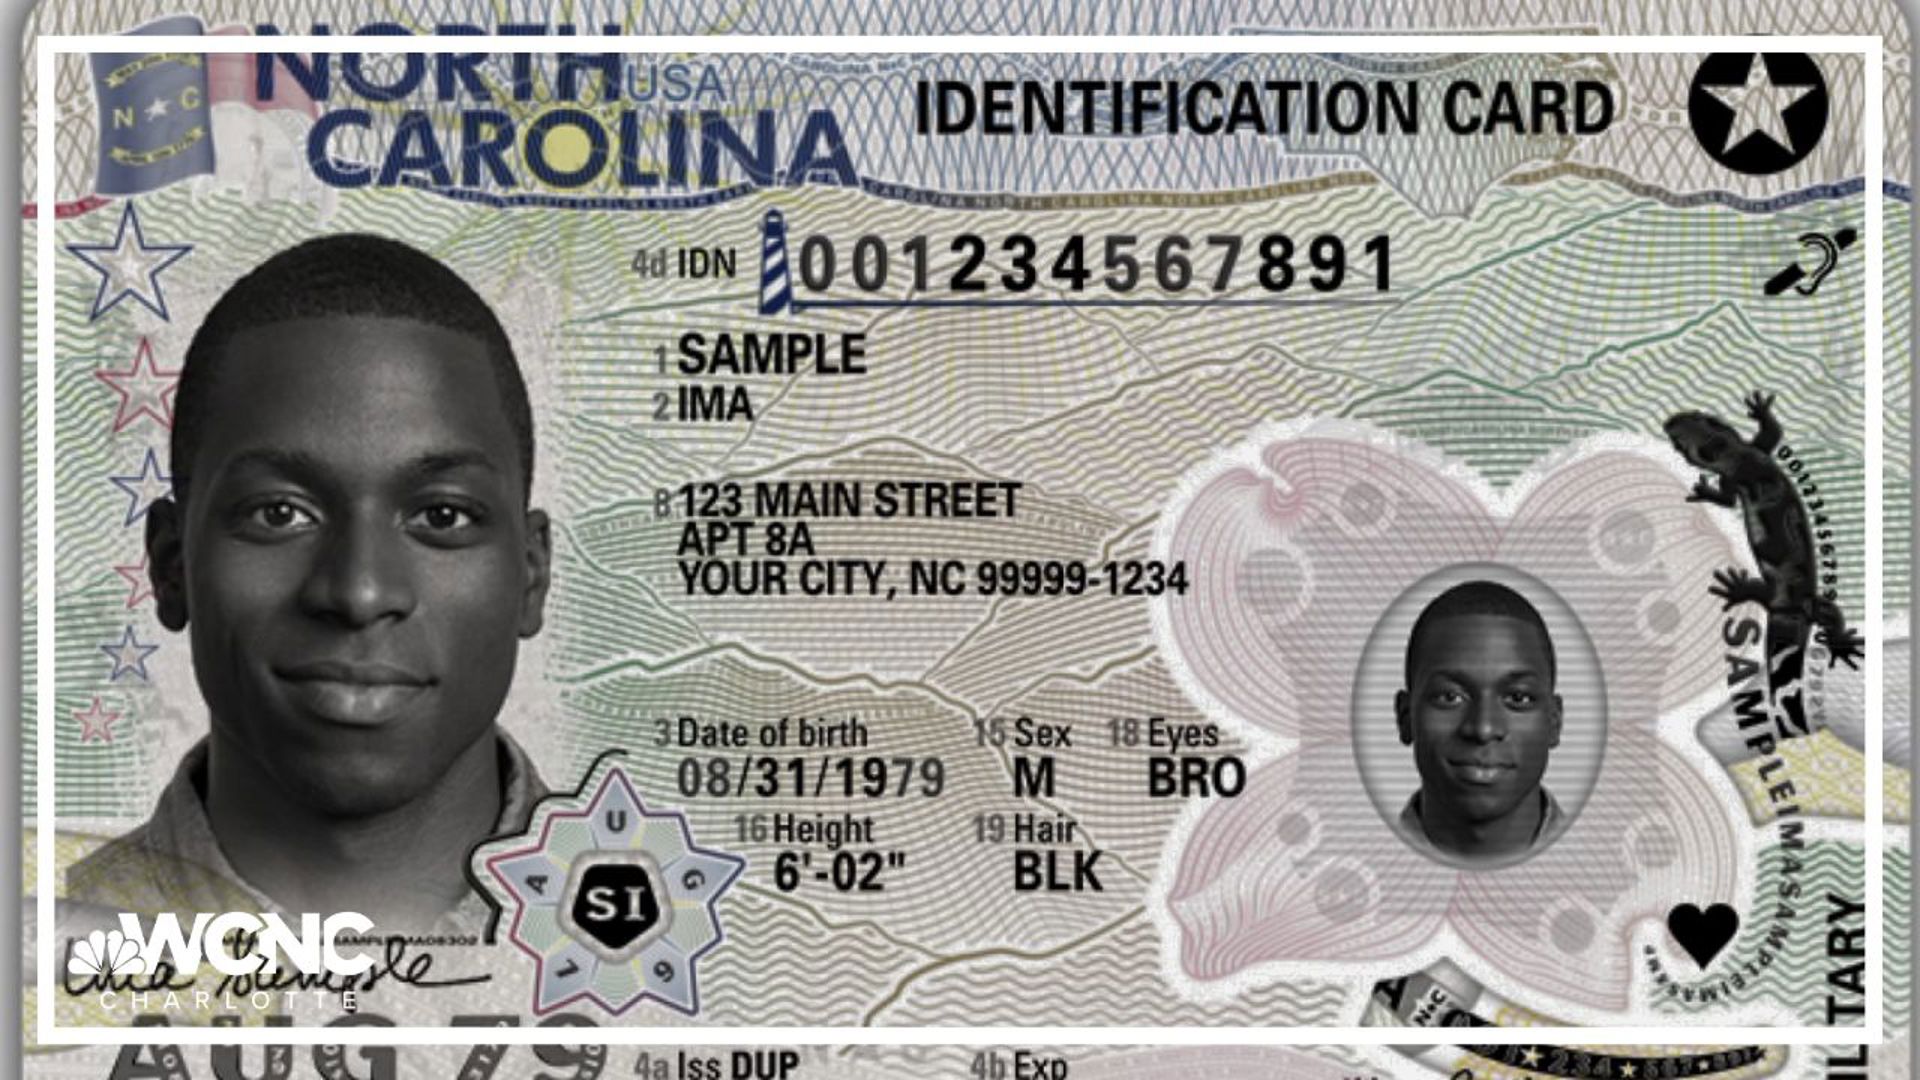 Governor Roy Cooper signed a bill that would allow North Carolina drivers to use digital driver licenses starting next July.